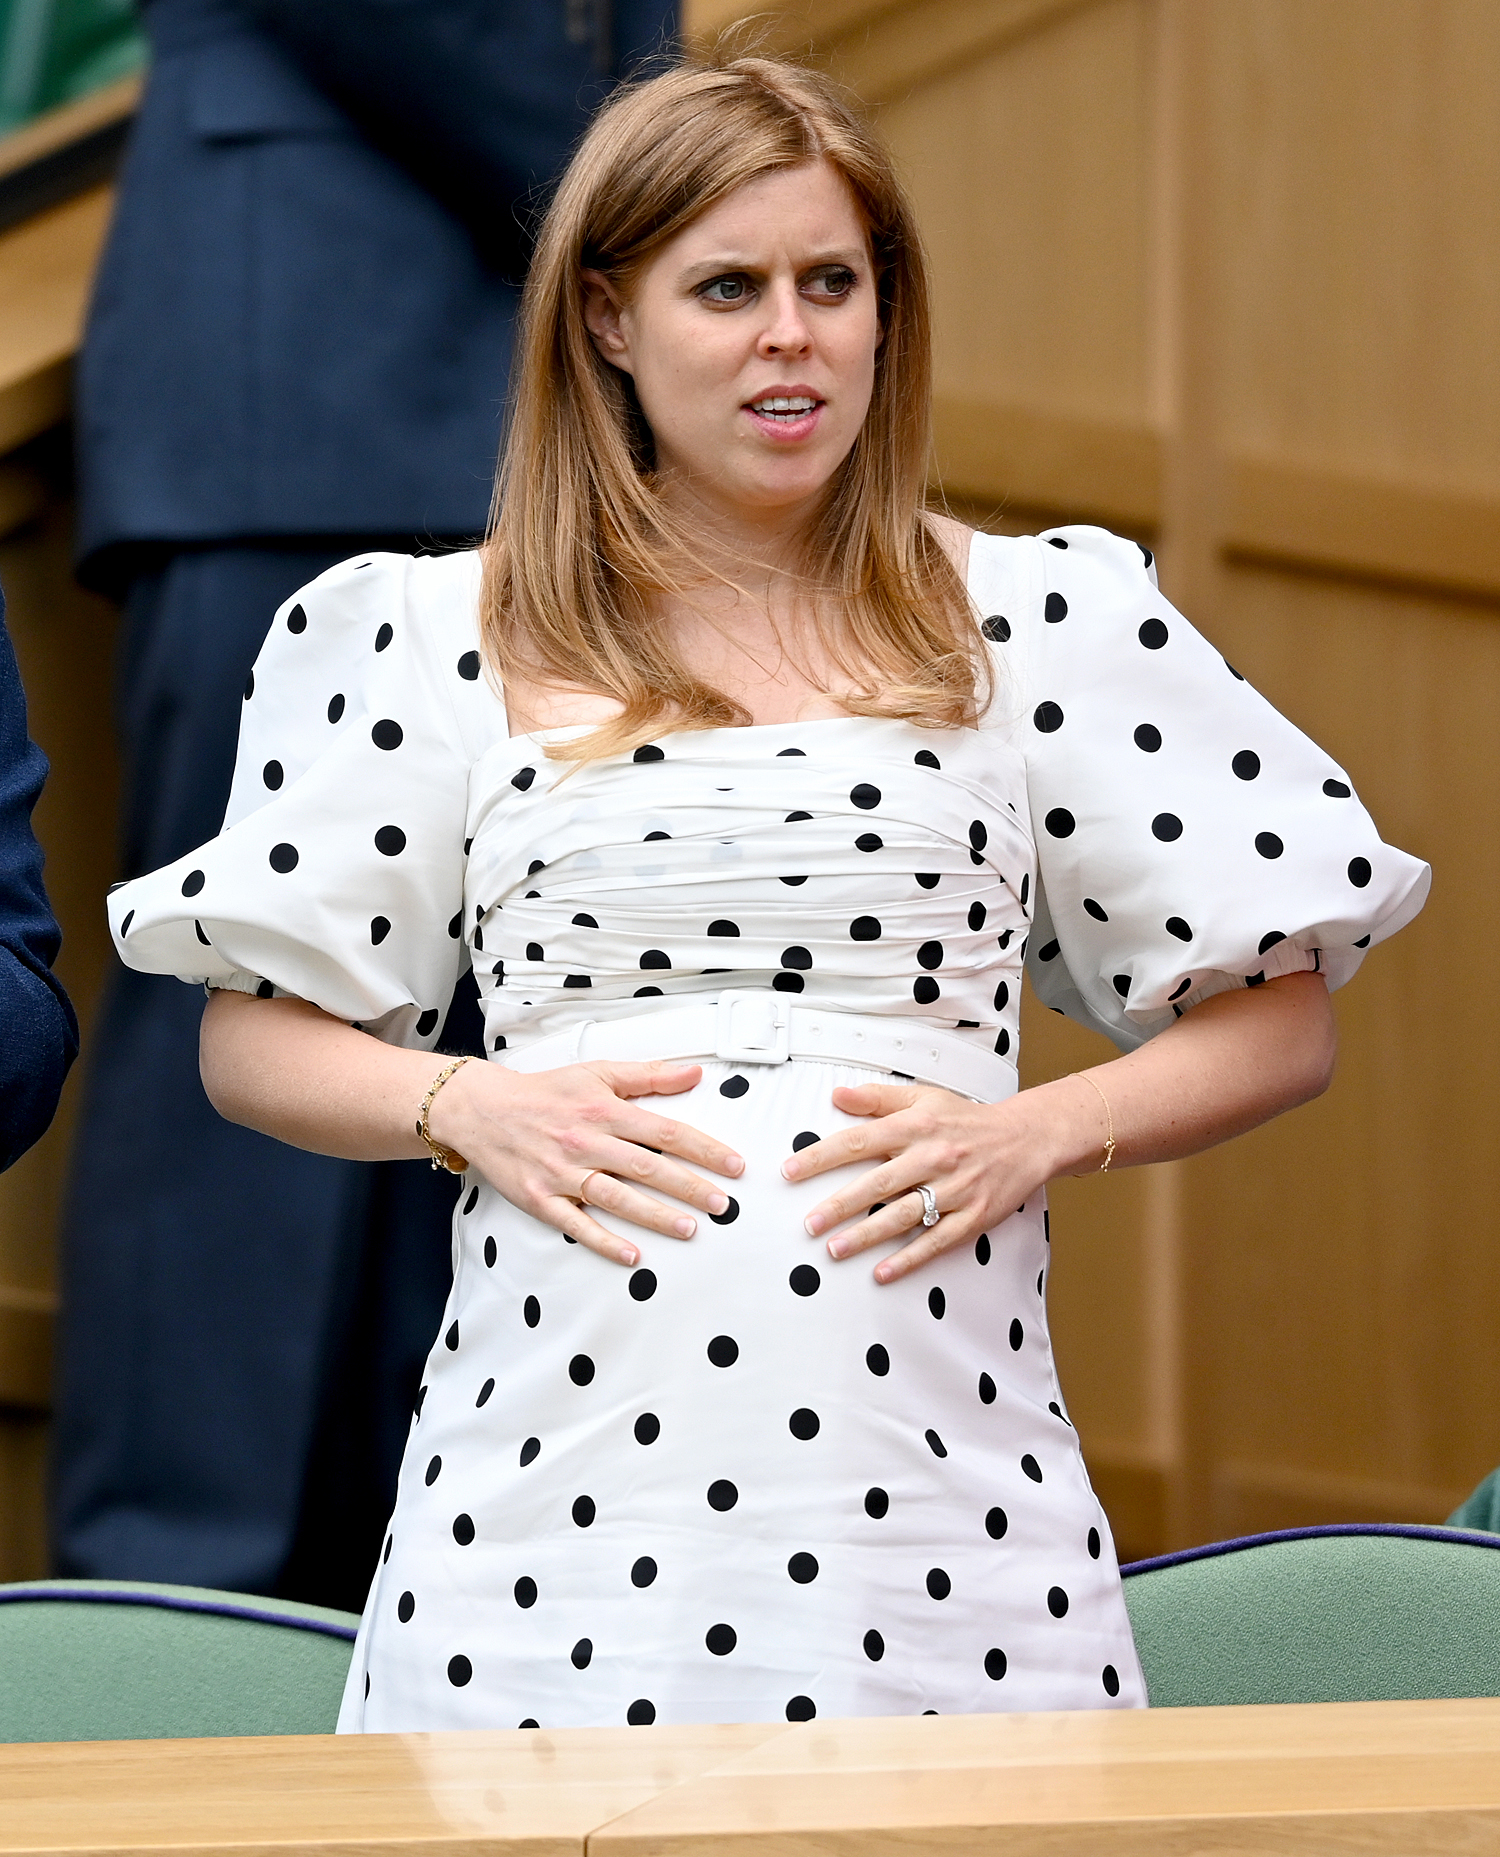 Queen's Granddaughter Princess Beatrice and Edo Mozzi Announce Daugher's birth! Name not yet Revealed